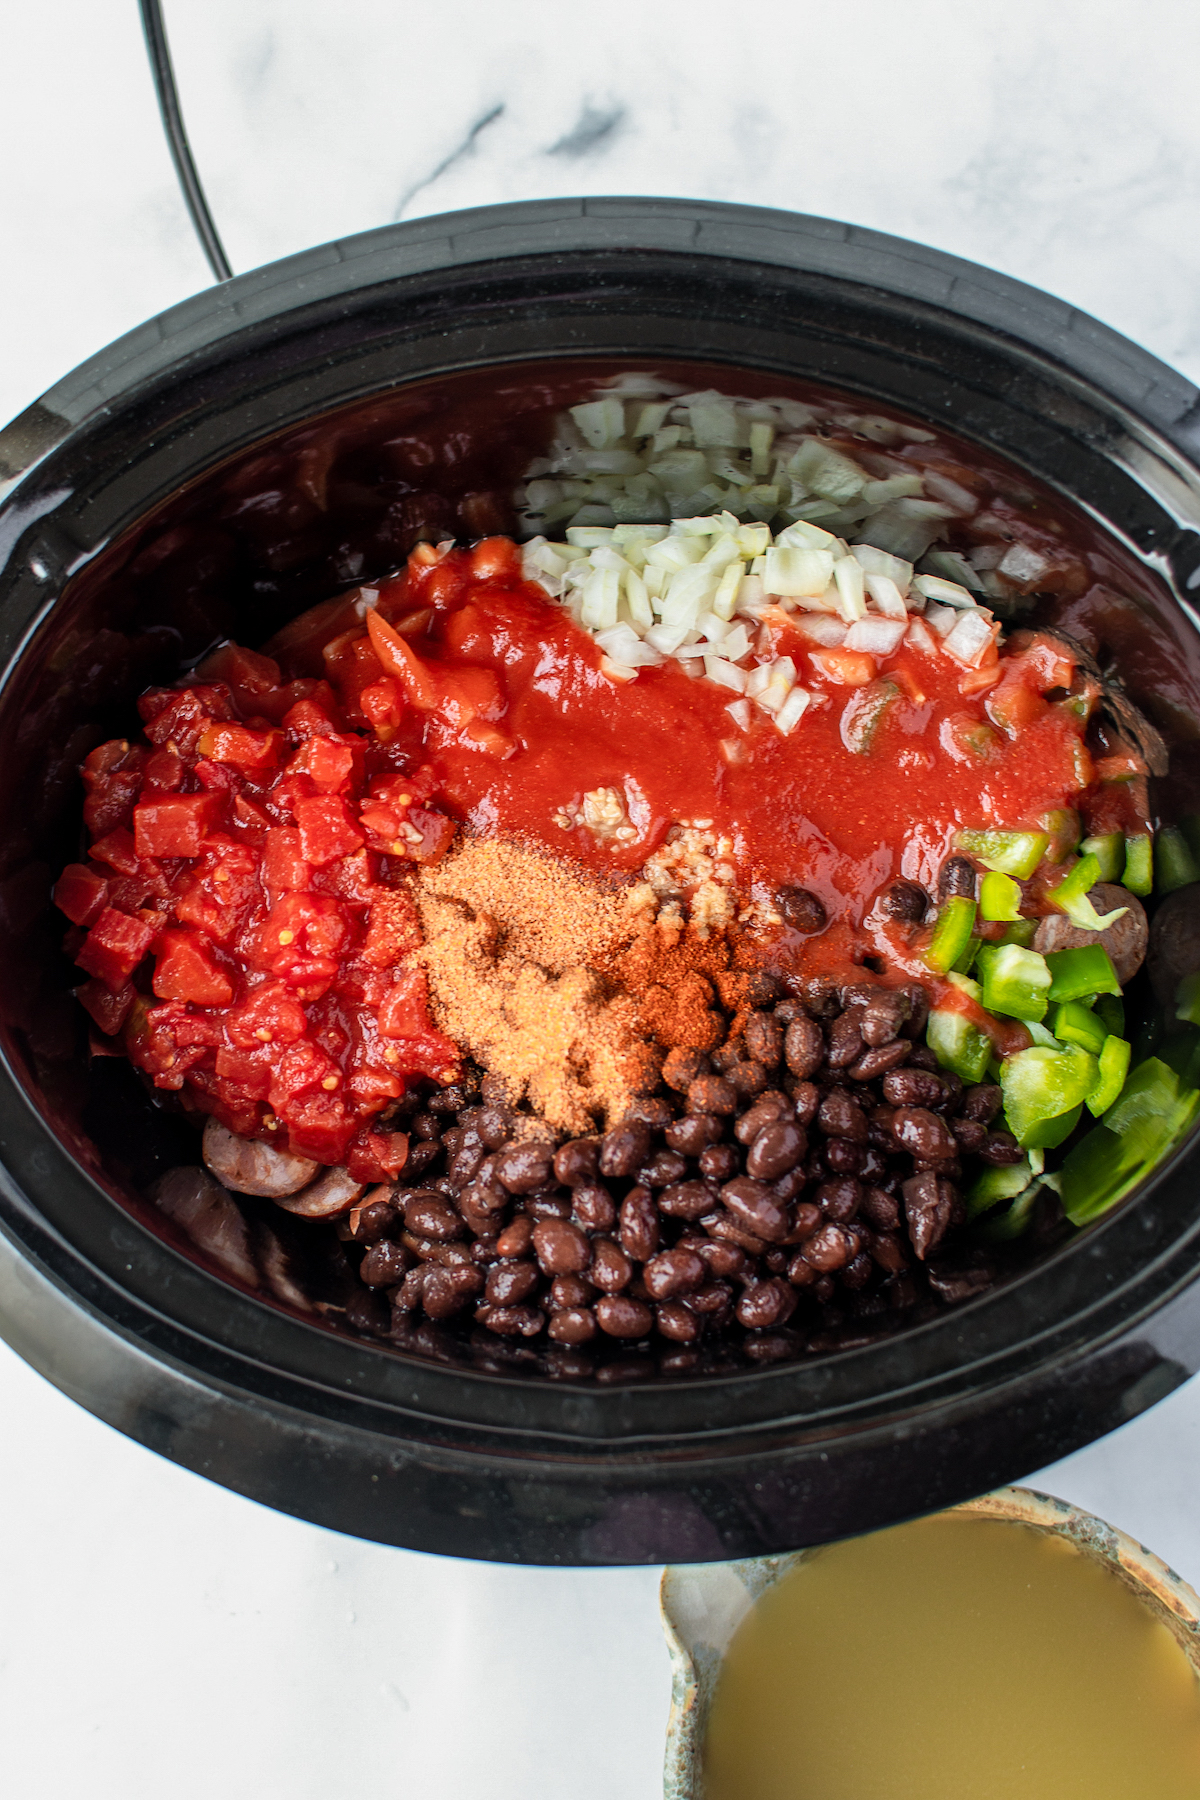 A slow cooker insert with diced tomatoes, tomato sauce, chopped veggies, and black beans added to it.